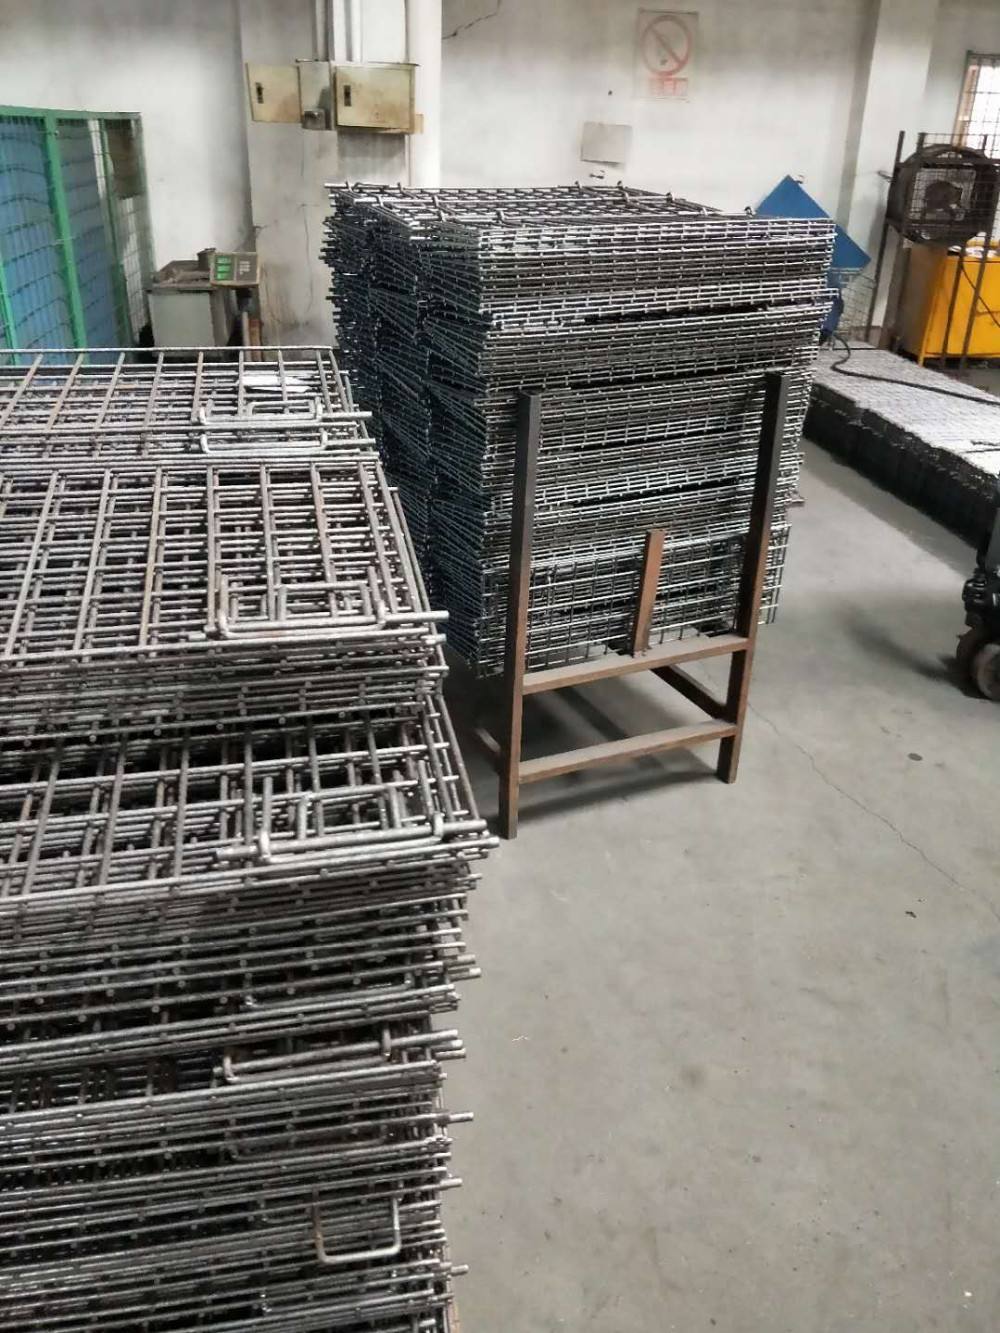 Industrial customized logistic hot sale steel pipe storage tire rack /storage racking system